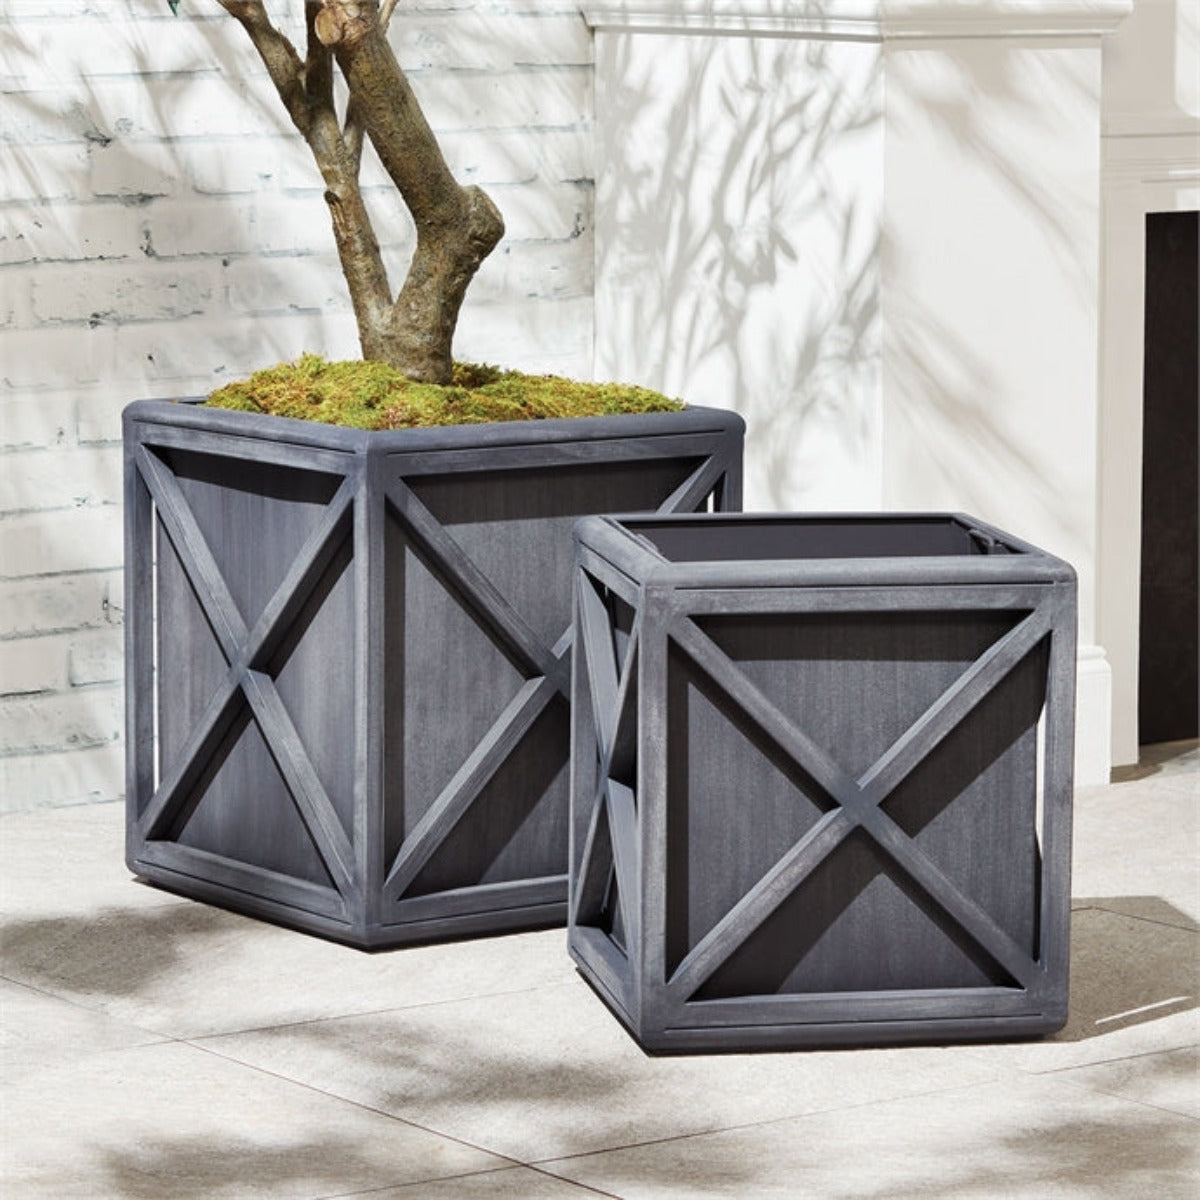 Terrace Planters - Two Sizes